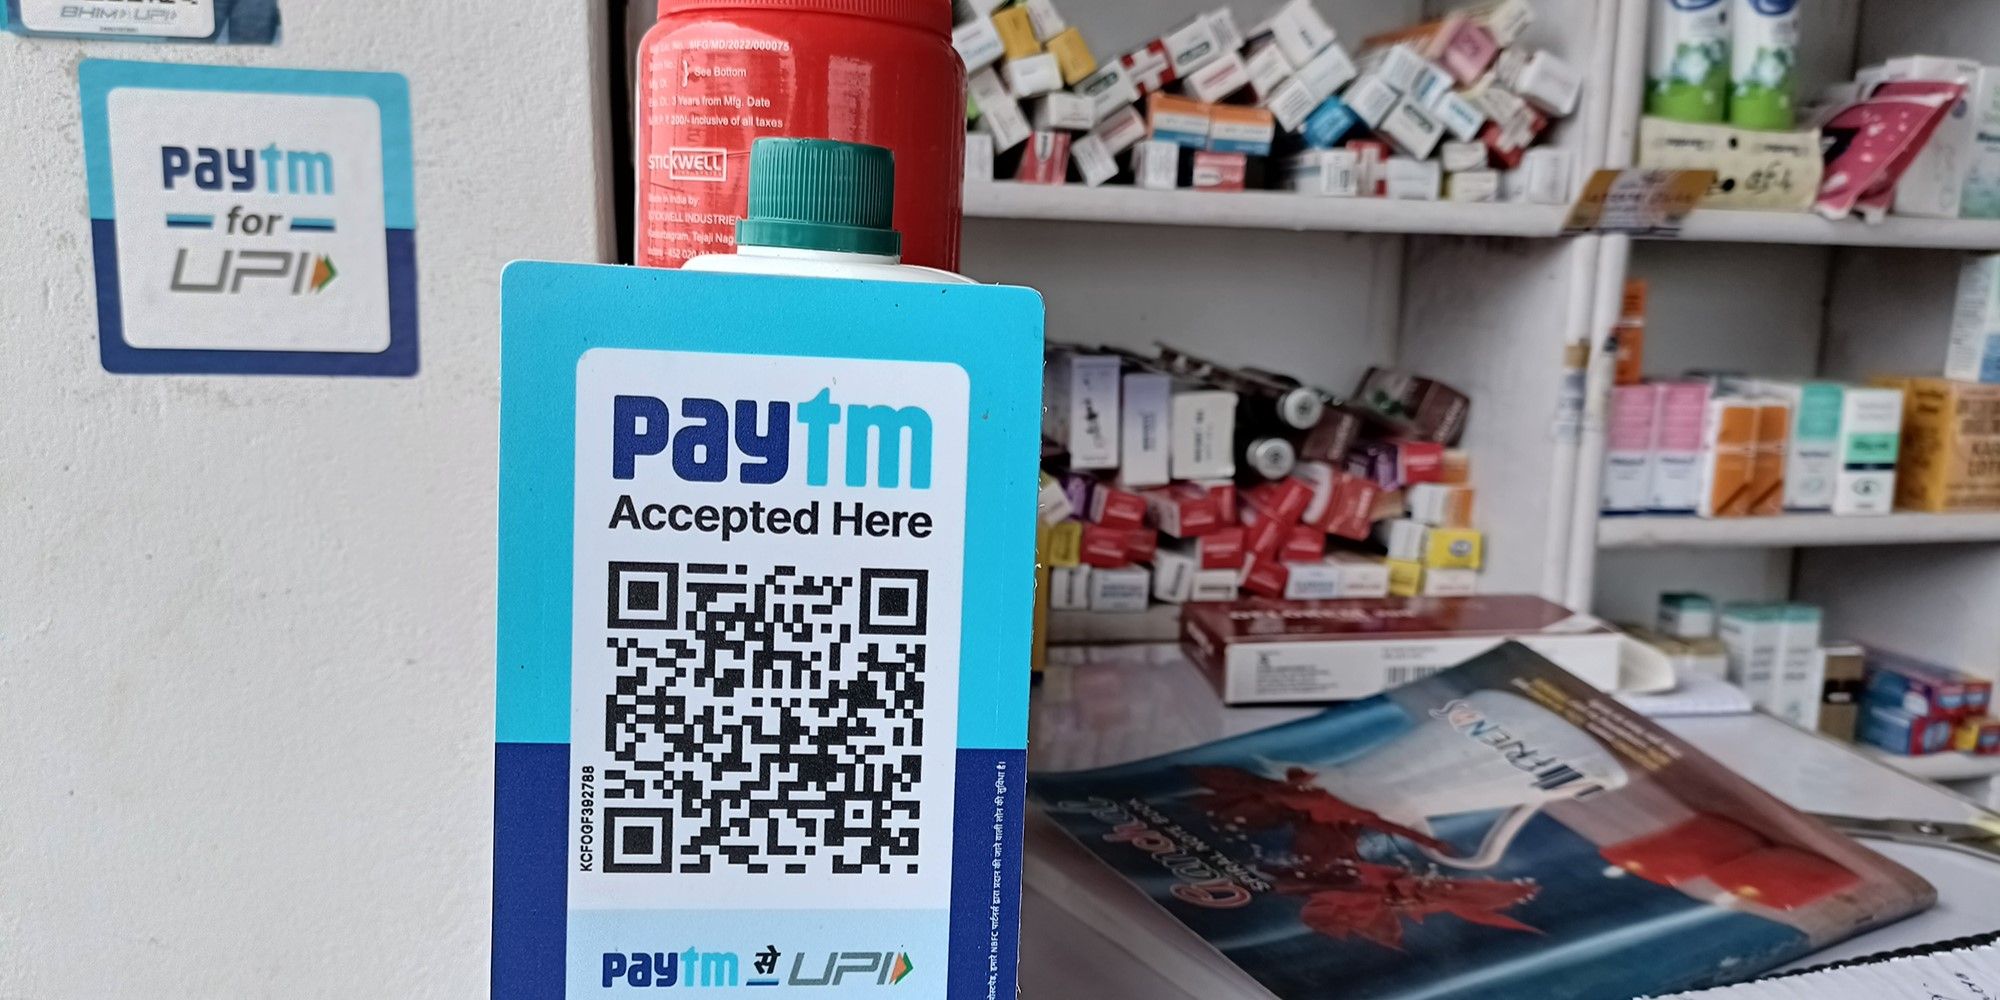 Paytm advisory panel discussing terms of reference with company, says panel head